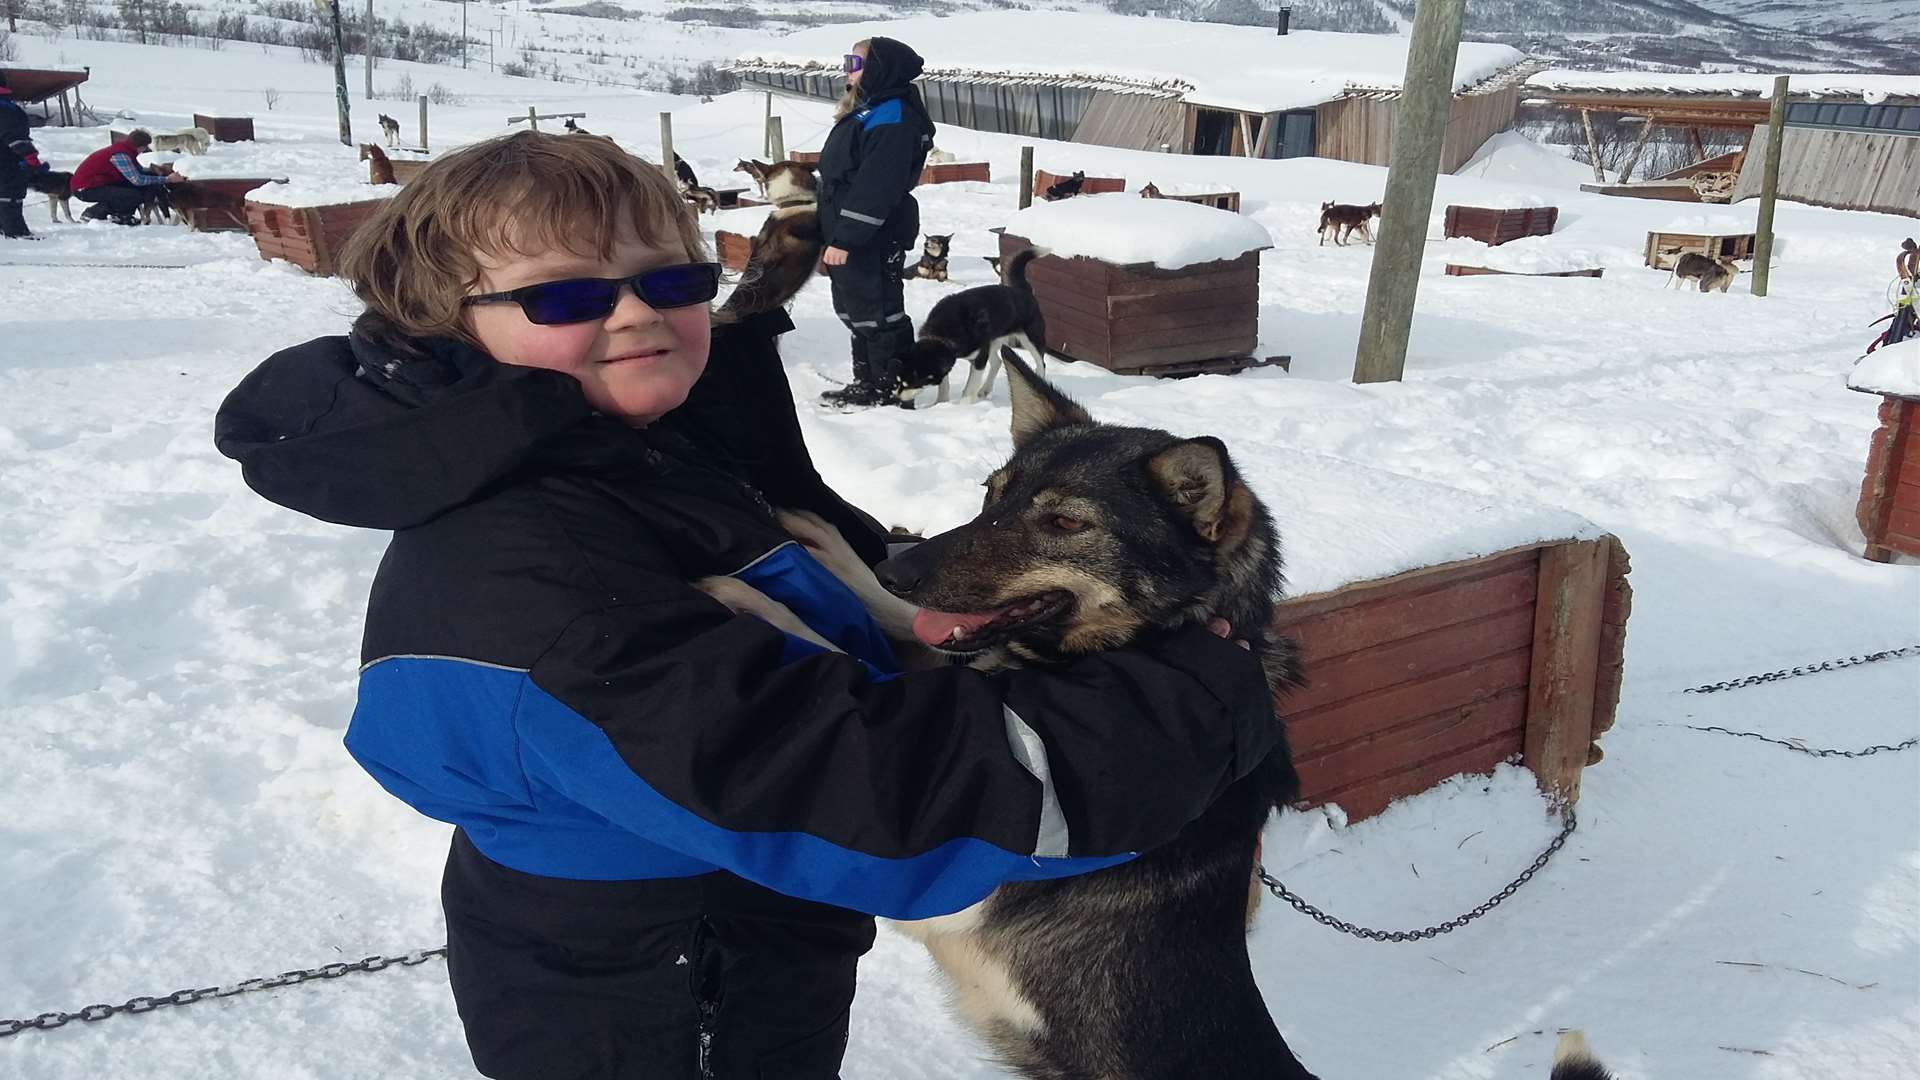 Oakley orange enjoyed a trip to Norway with his family, organised by the Make A Wish foundation